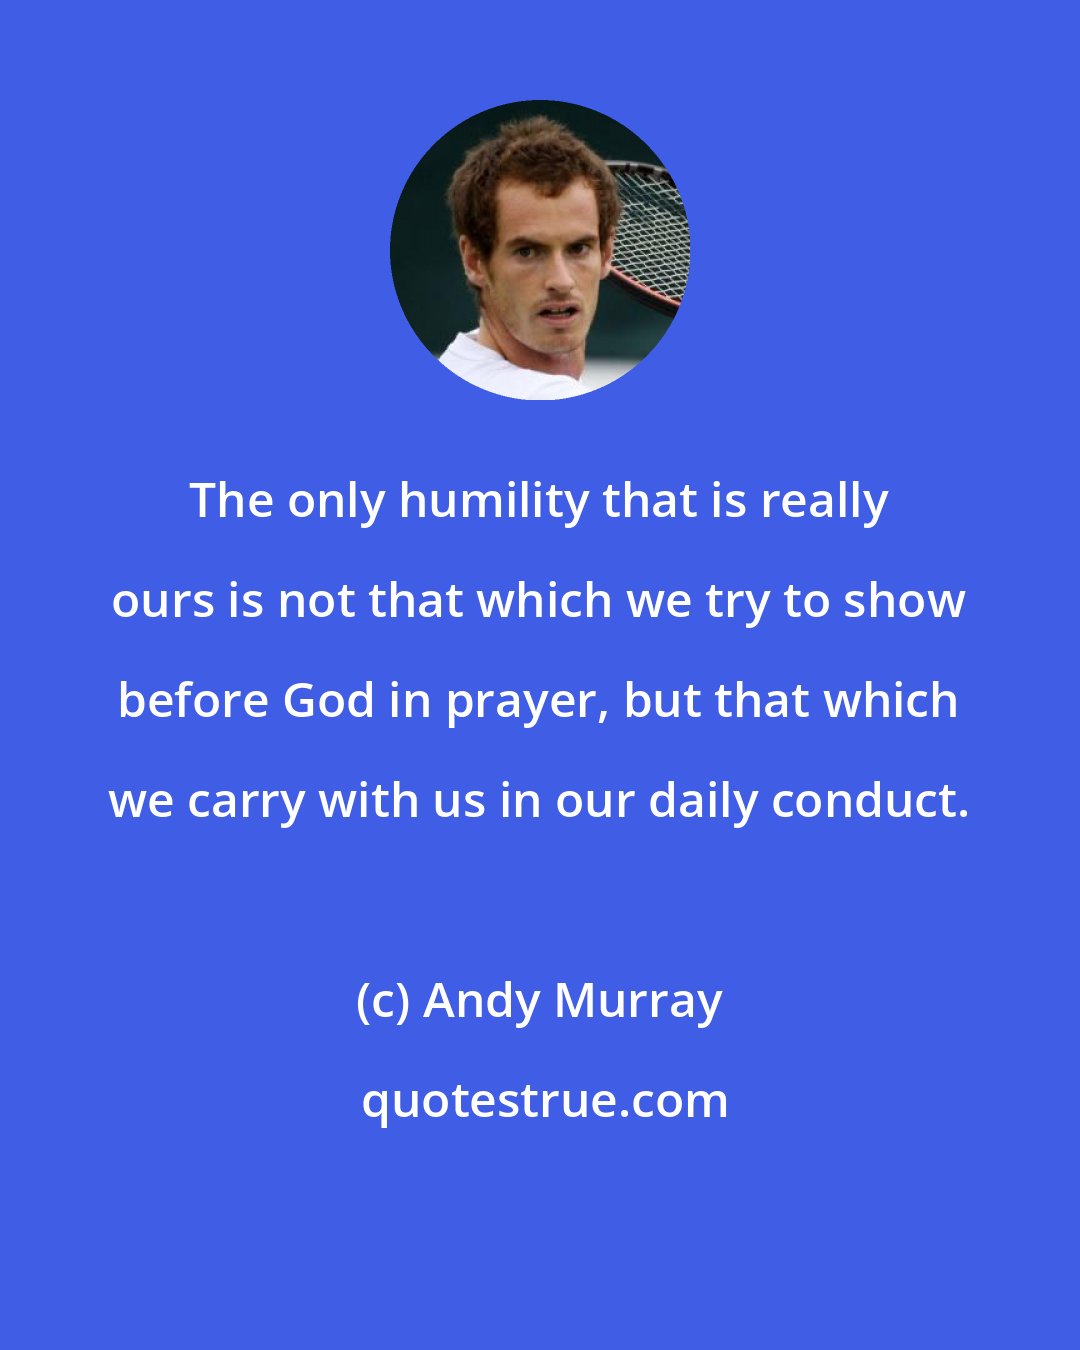 Andy Murray: The only humility that is really ours is not that which we try to show before God in prayer, but that which we carry with us in our daily conduct.